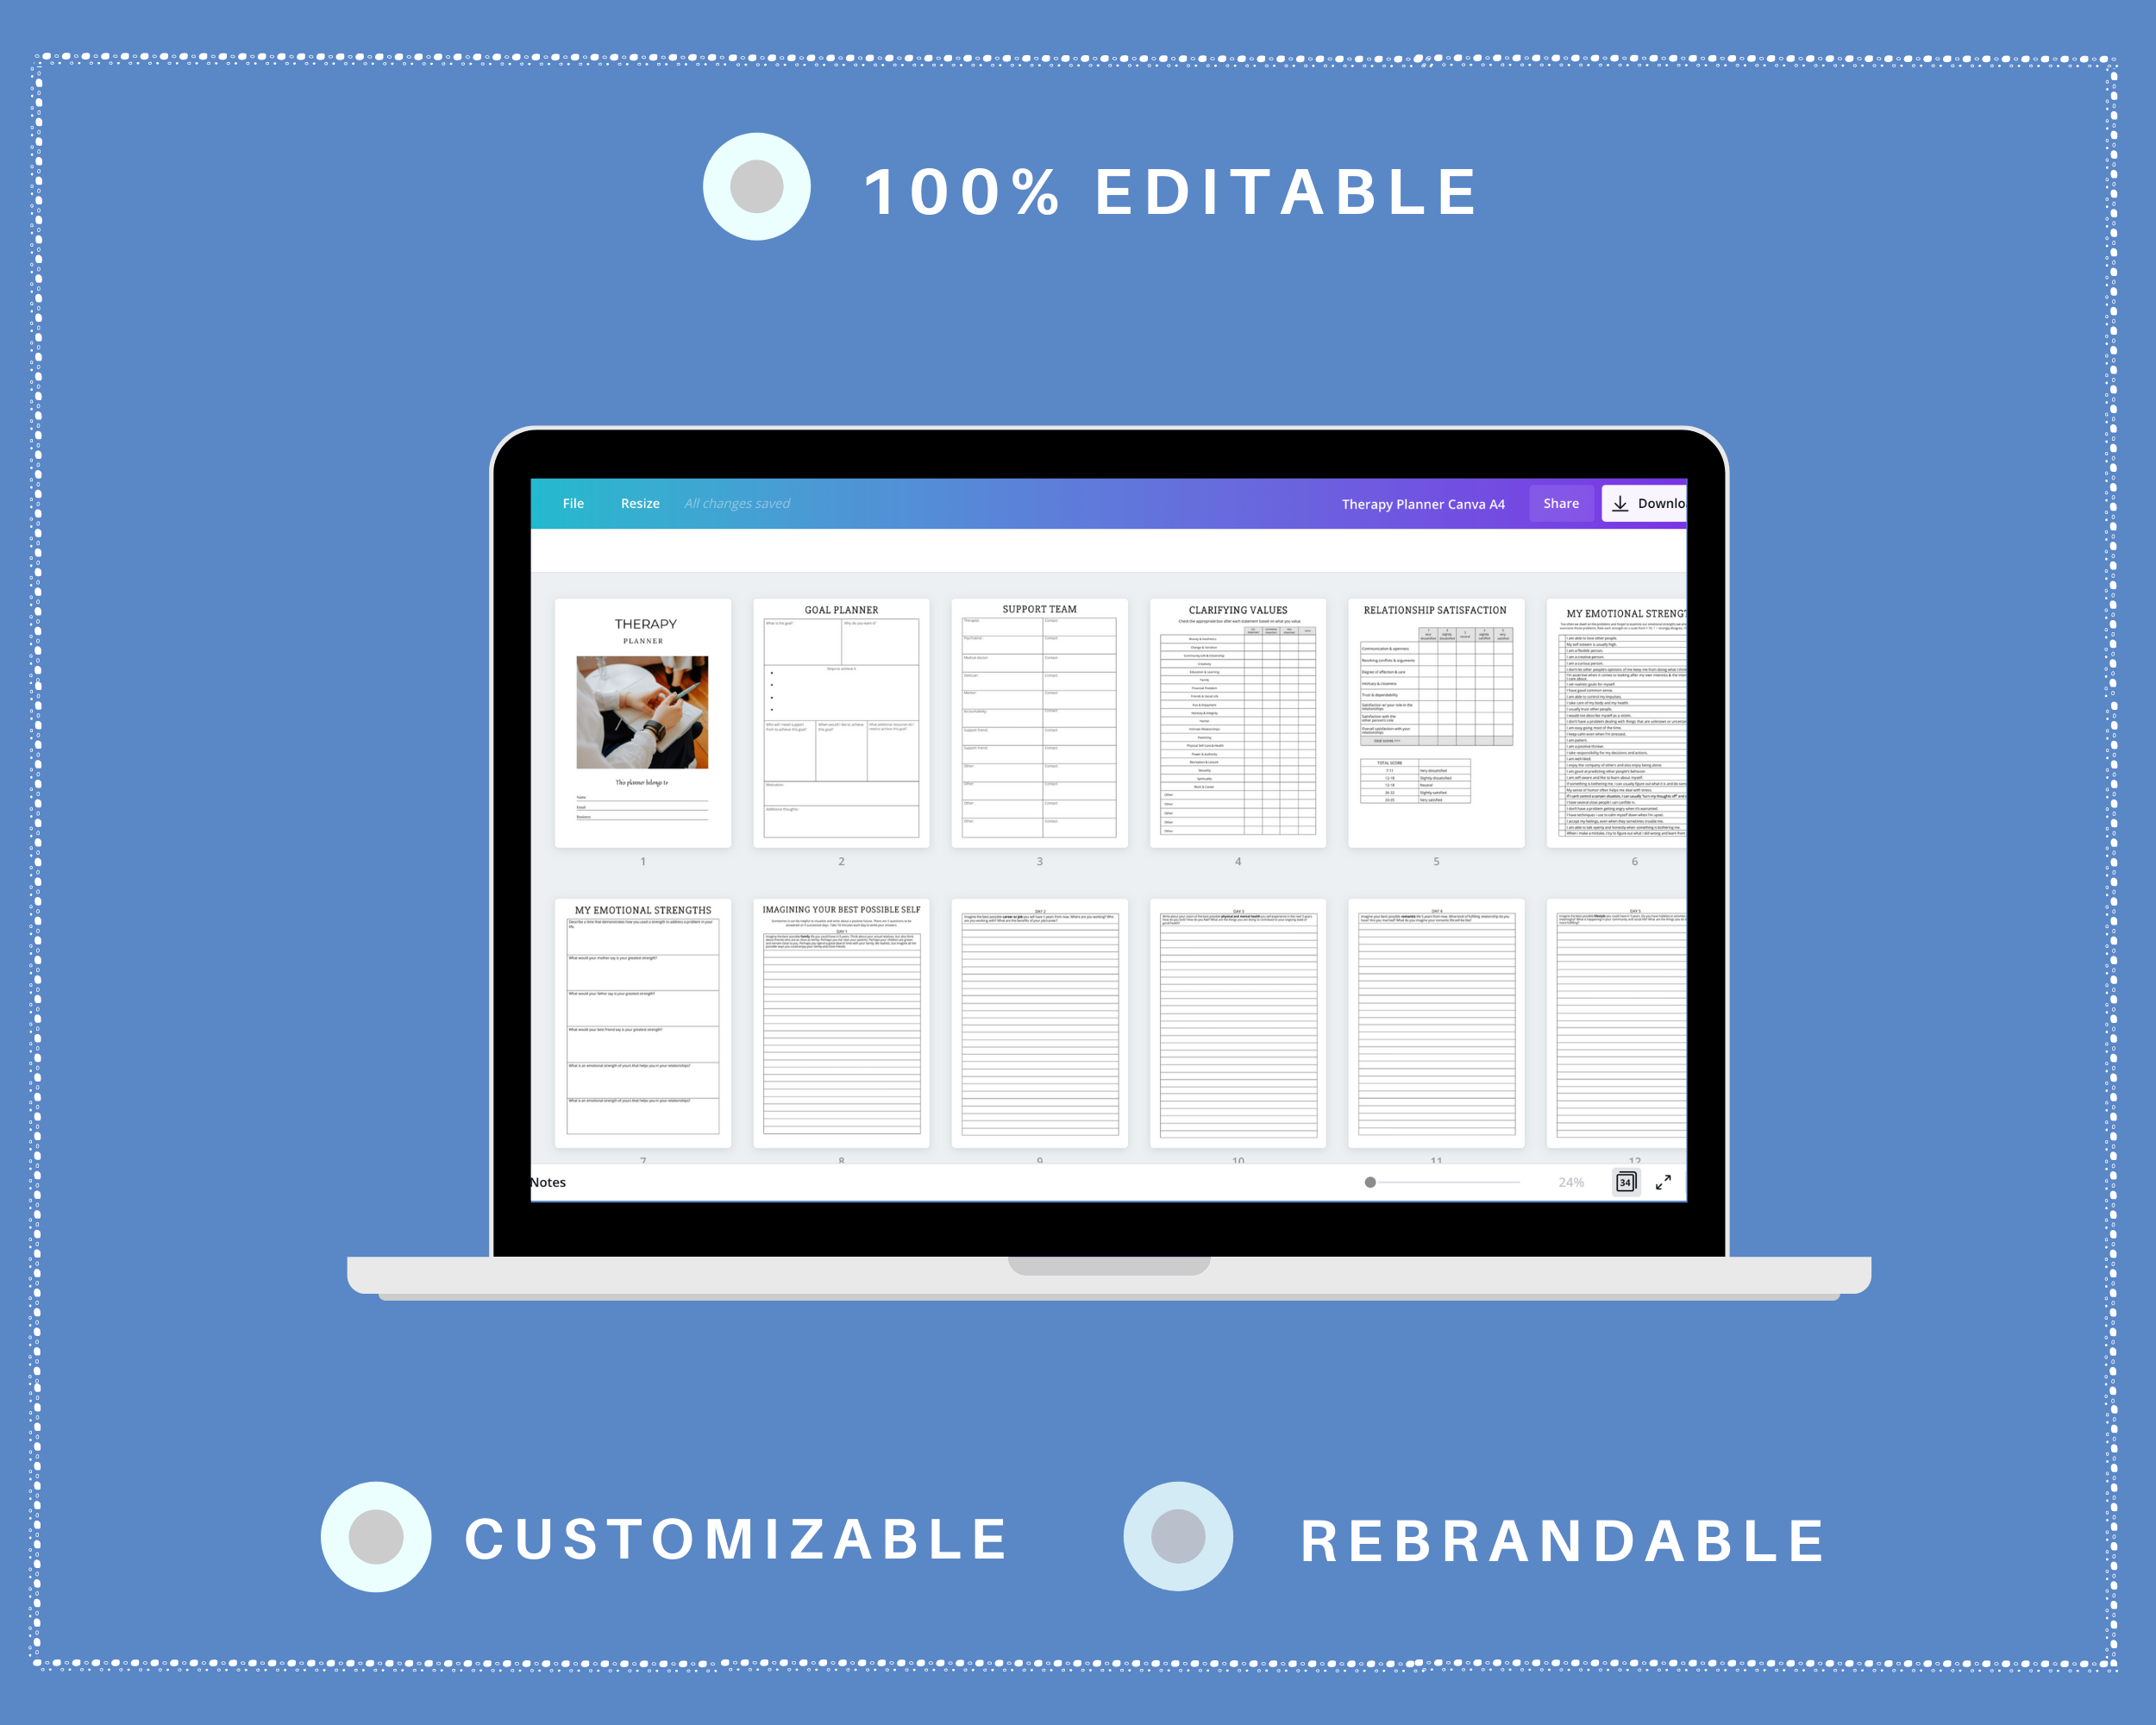 Editable Therapy Planner in Canva | Commercial Use